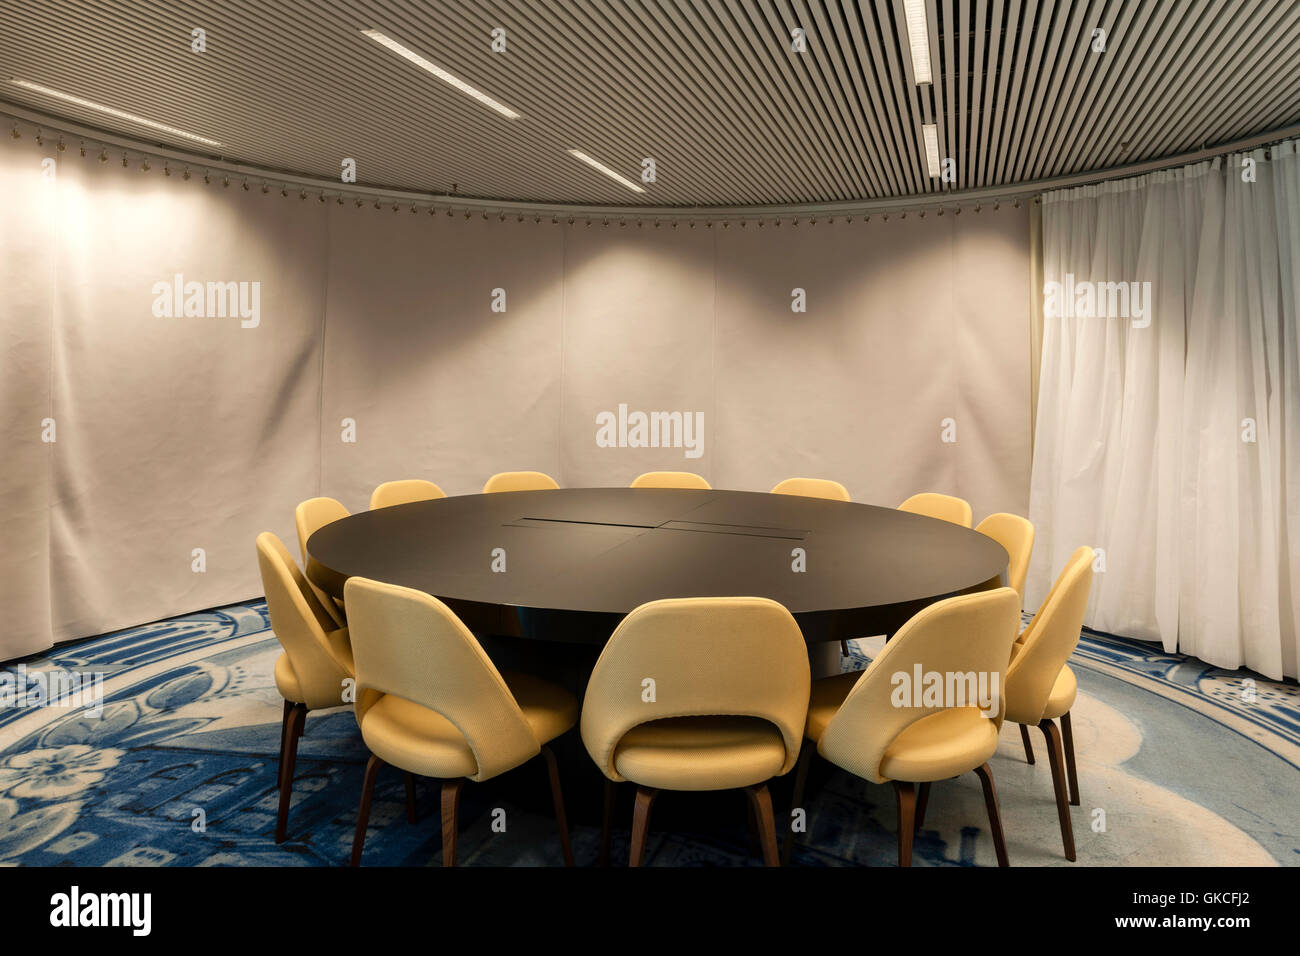 Meeting room showing designers furniture and themed carpet. Timmerhuis, Rotterdam, Netherlands. Architect: OMA Rem Koolhaas, 2015. Stock Photo